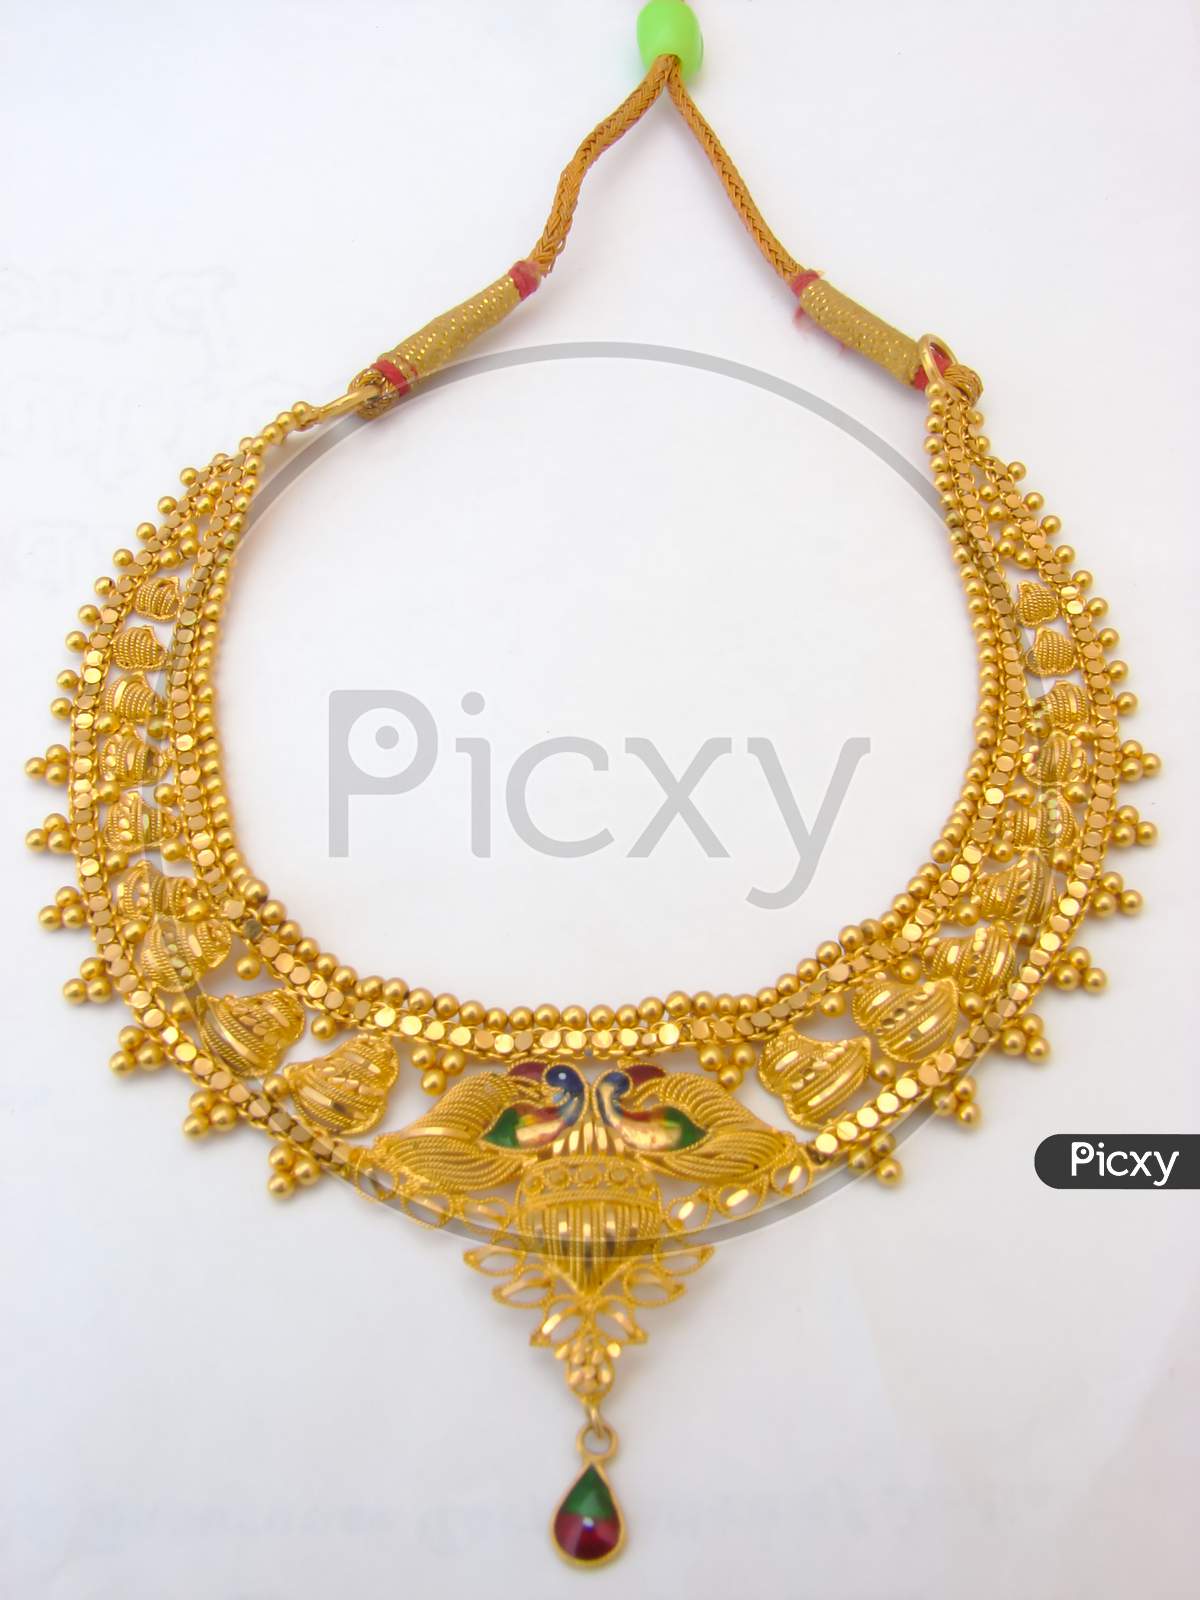 Isolated Indian Gold Necklace Closeup